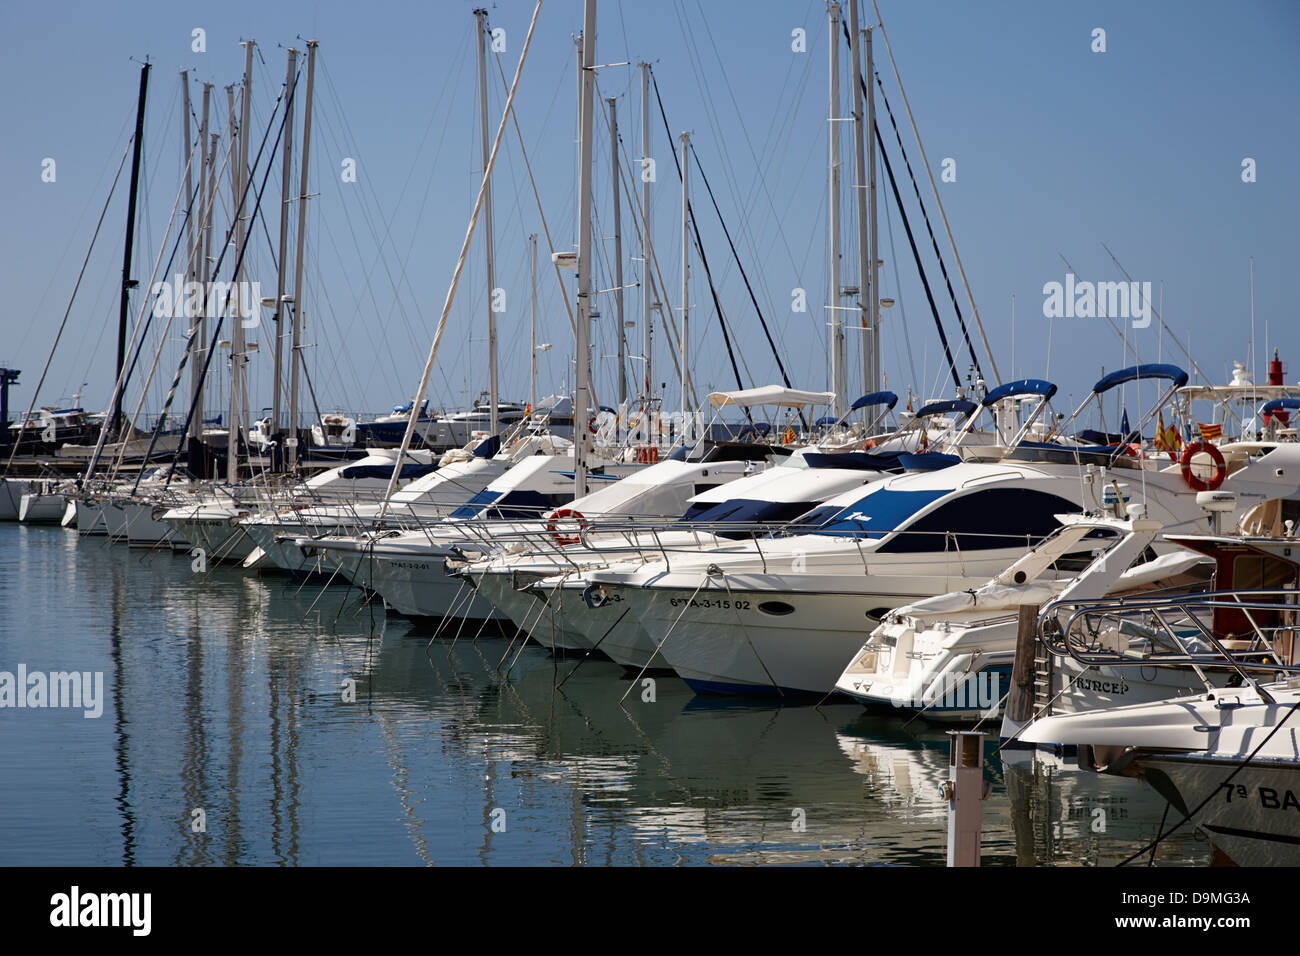 yachts and powerboats in the port marina Cambrils Catalonia Spain Stock Photo